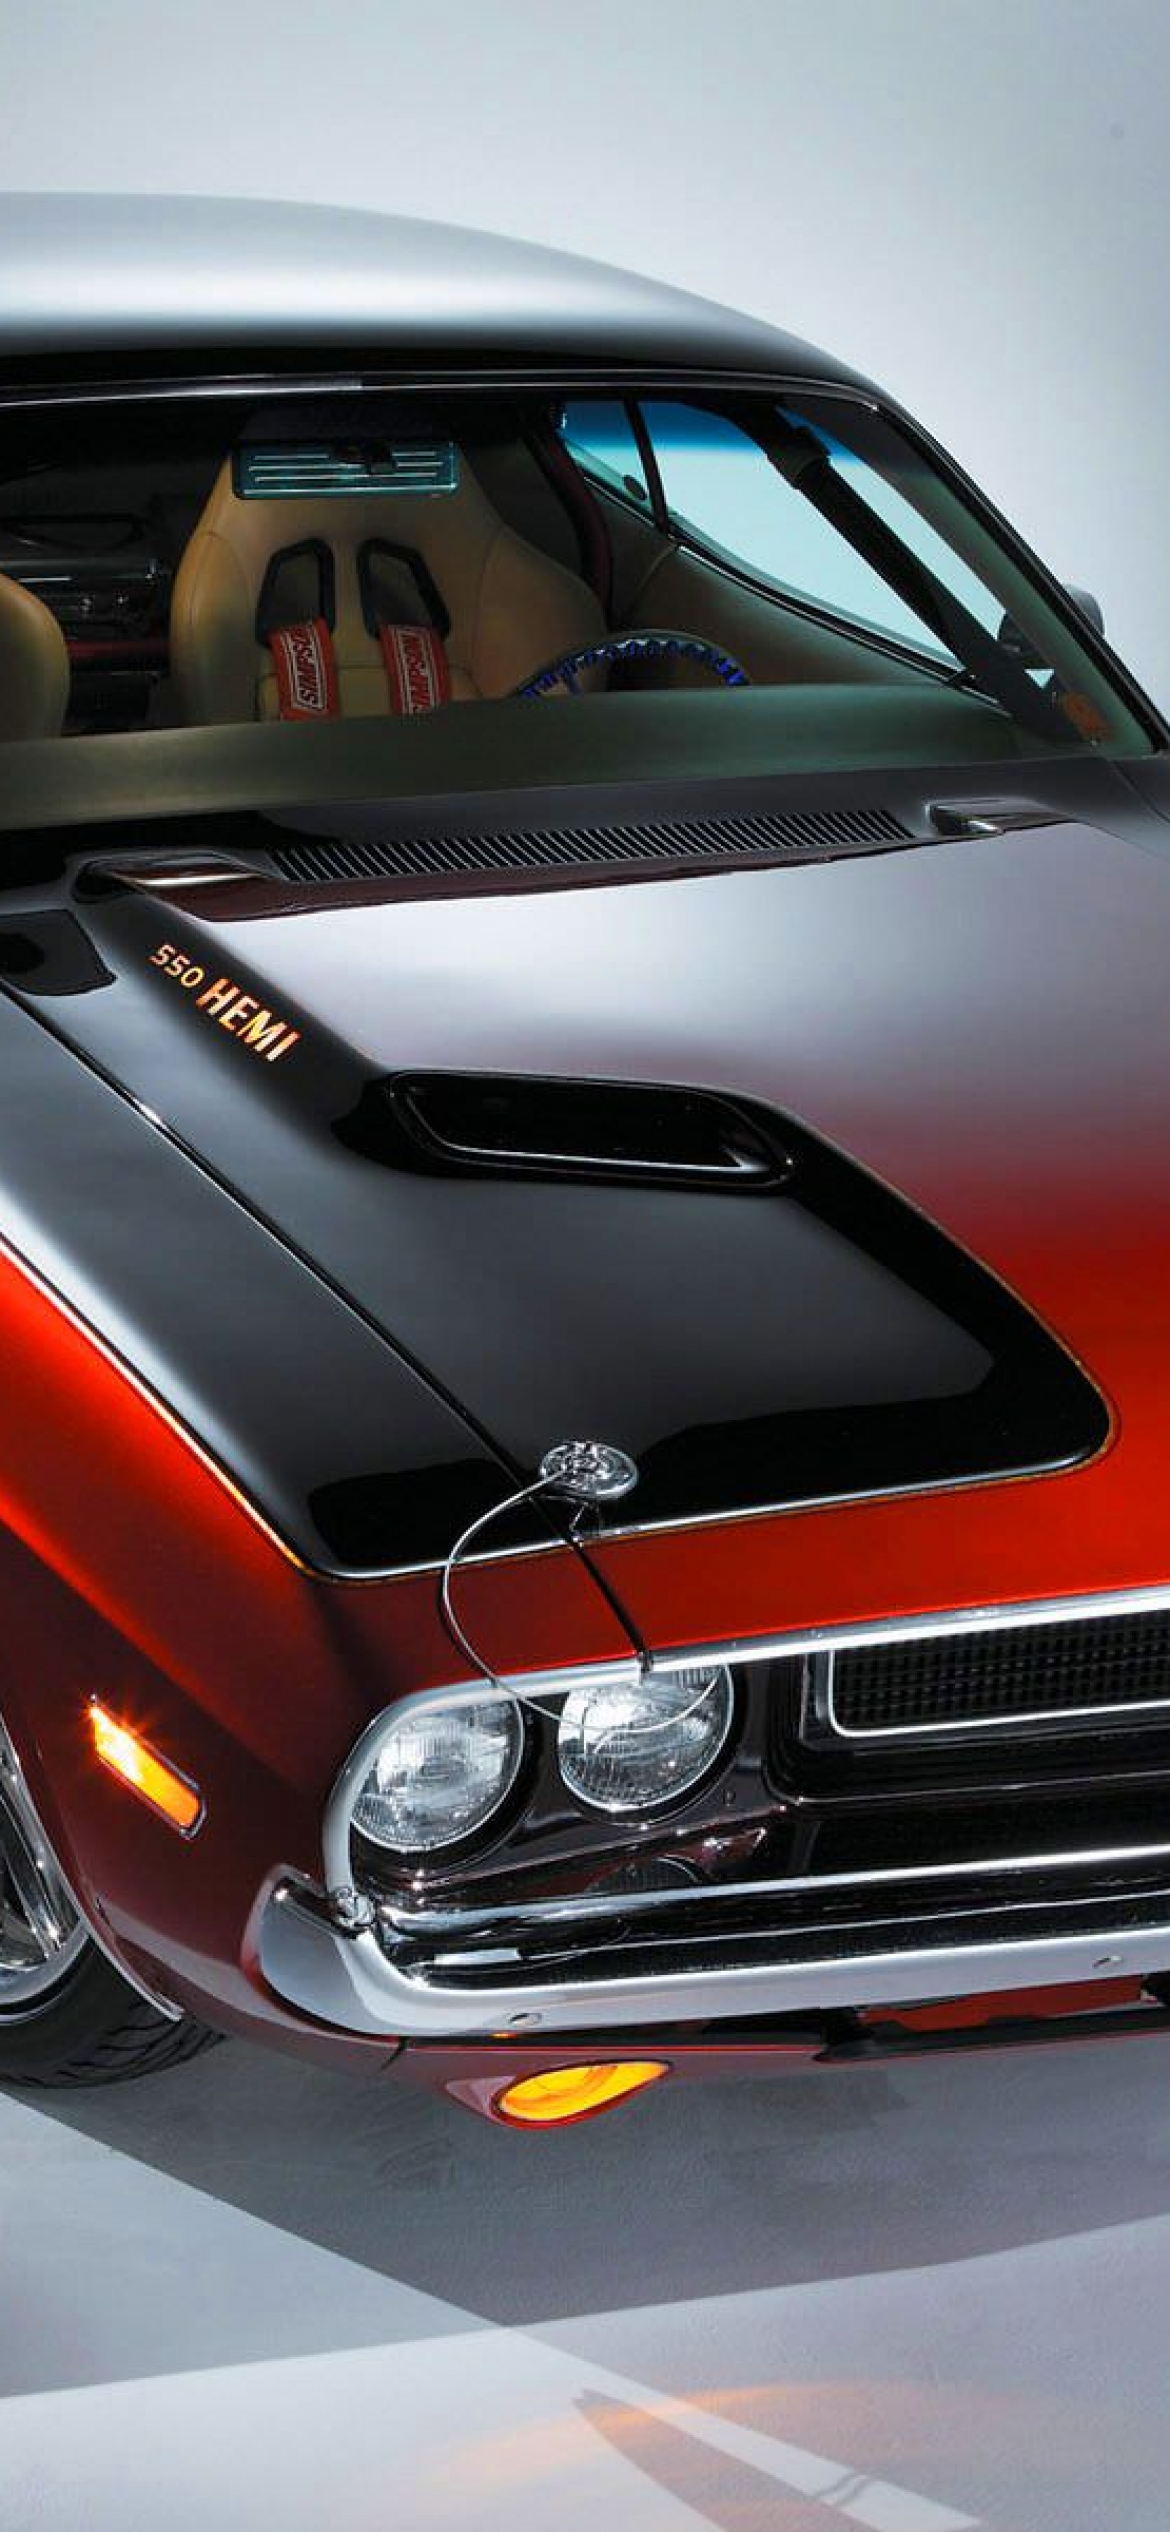 Dodge Charger black classic car 640x960 iPhone 44S wallpaper background  picture image